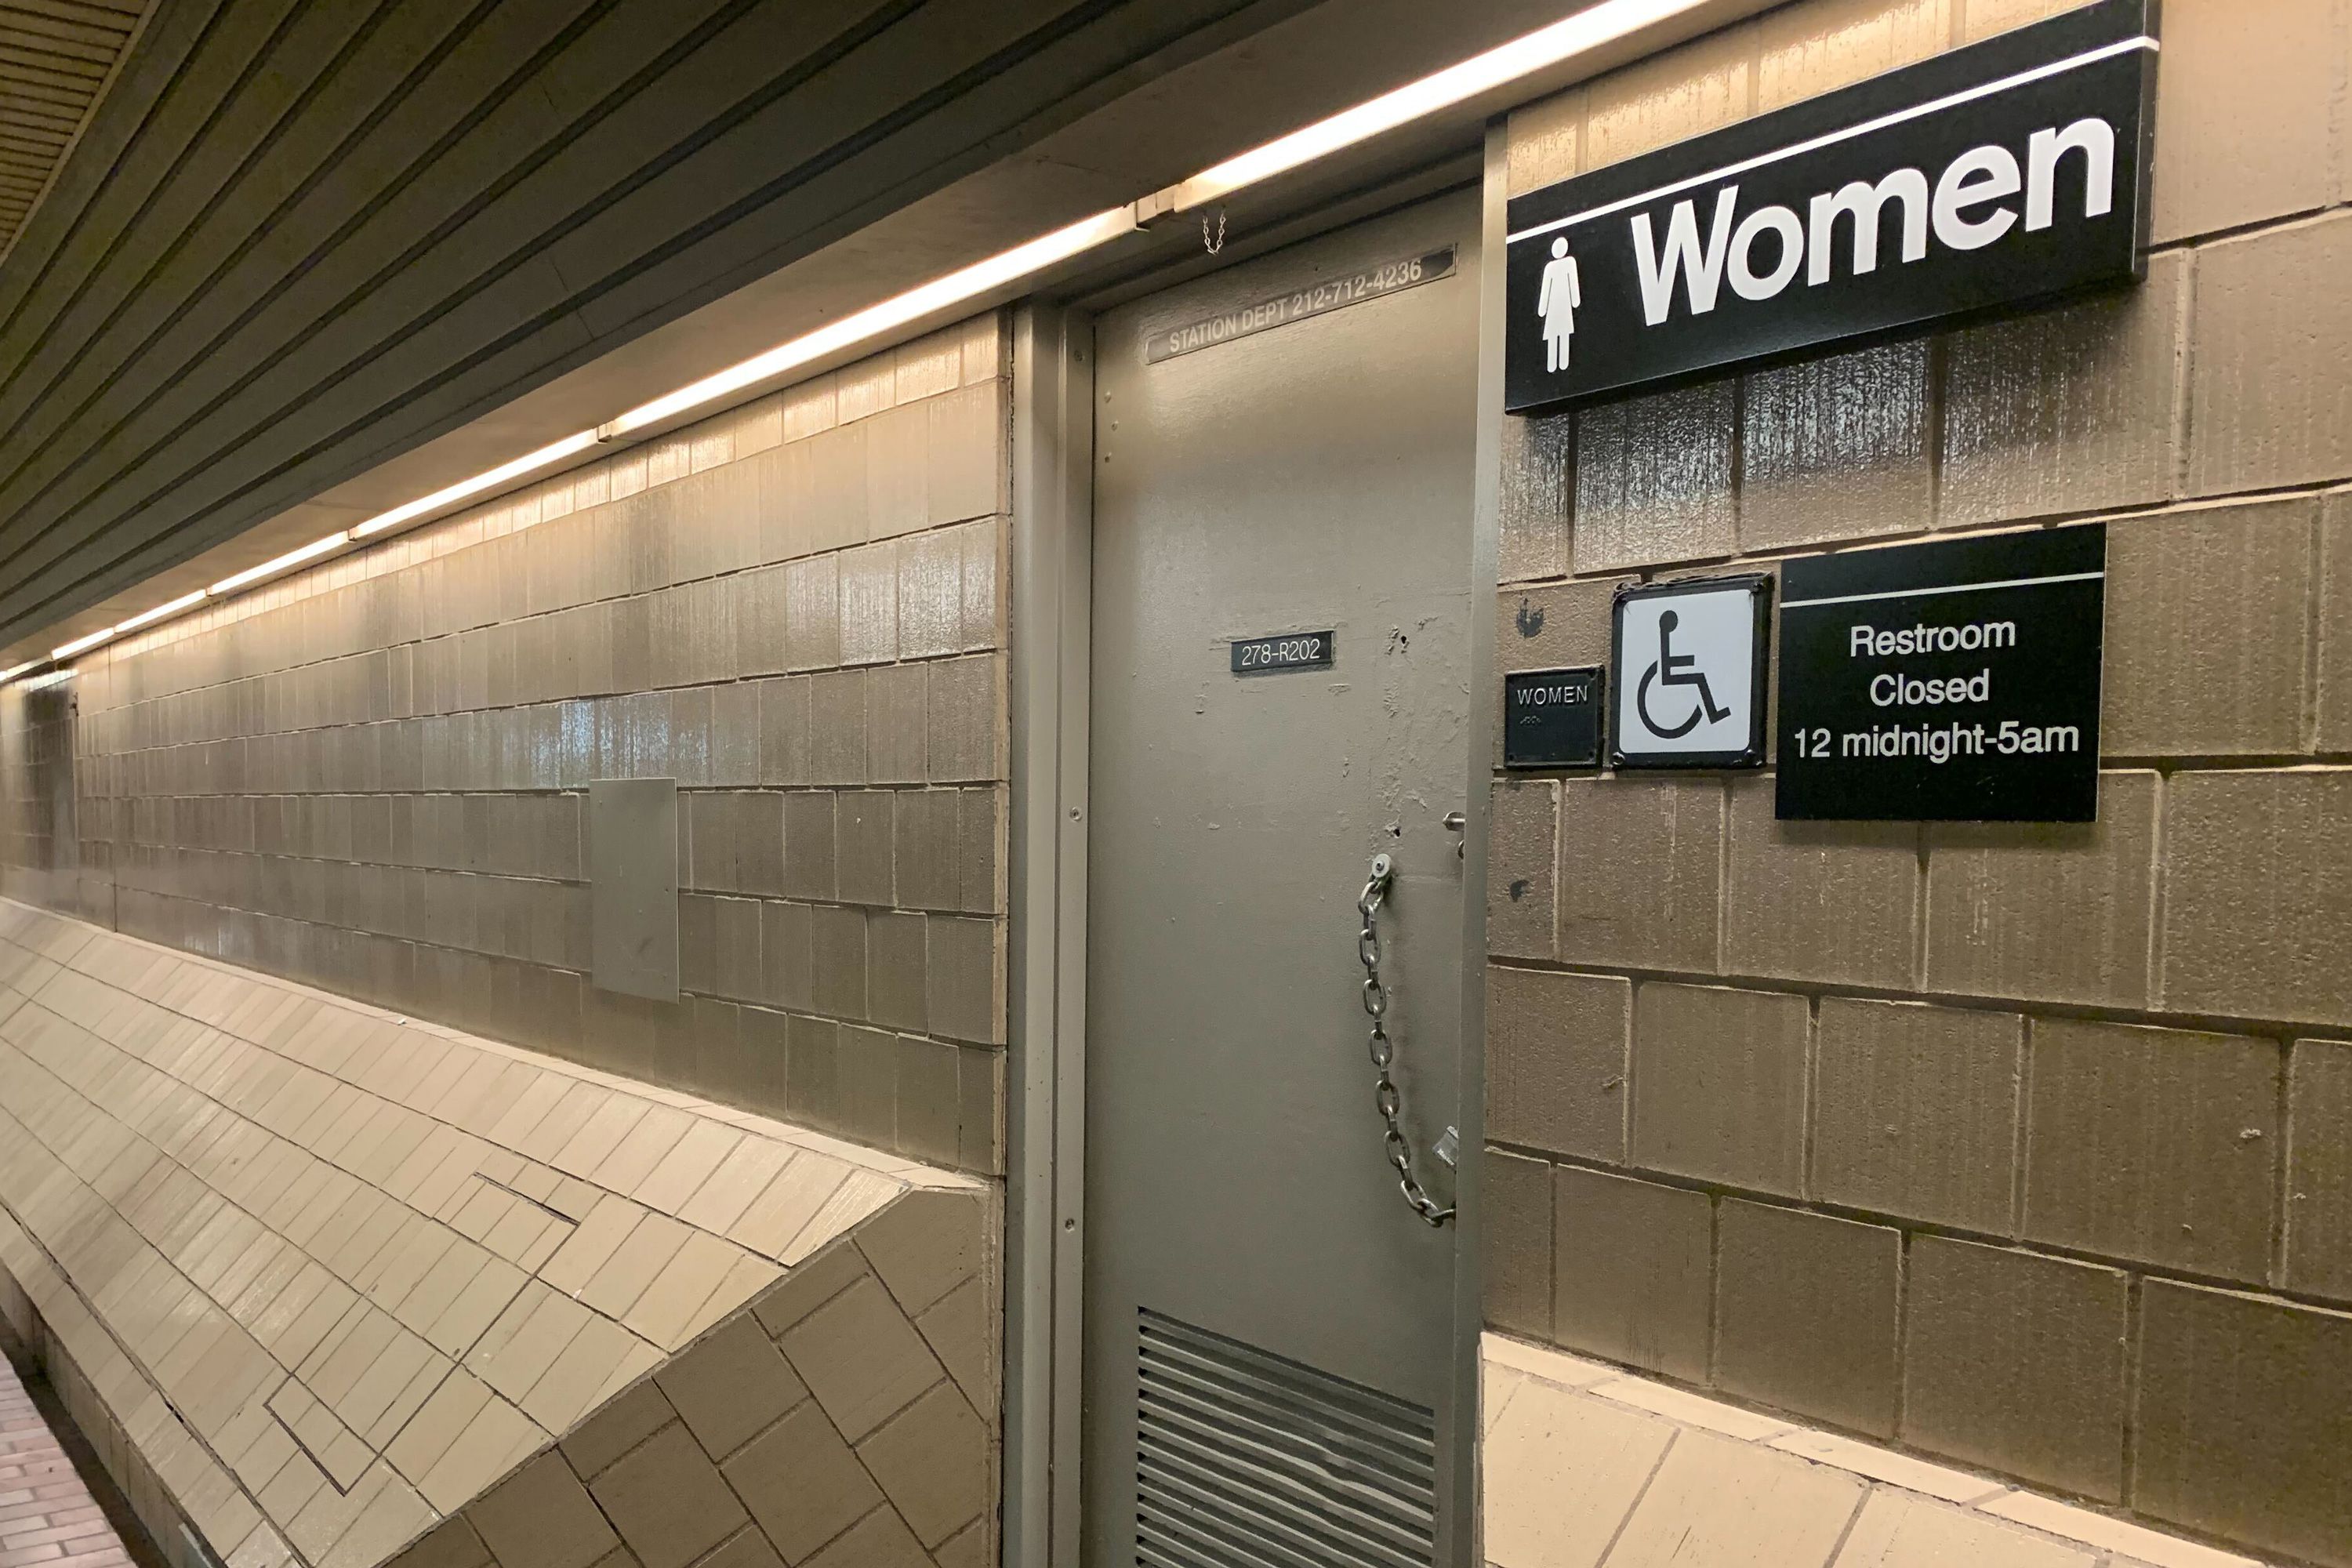 Locked bathrooms at the Jamaica Center-Parsons/Archer terminal. July 13, 2022.